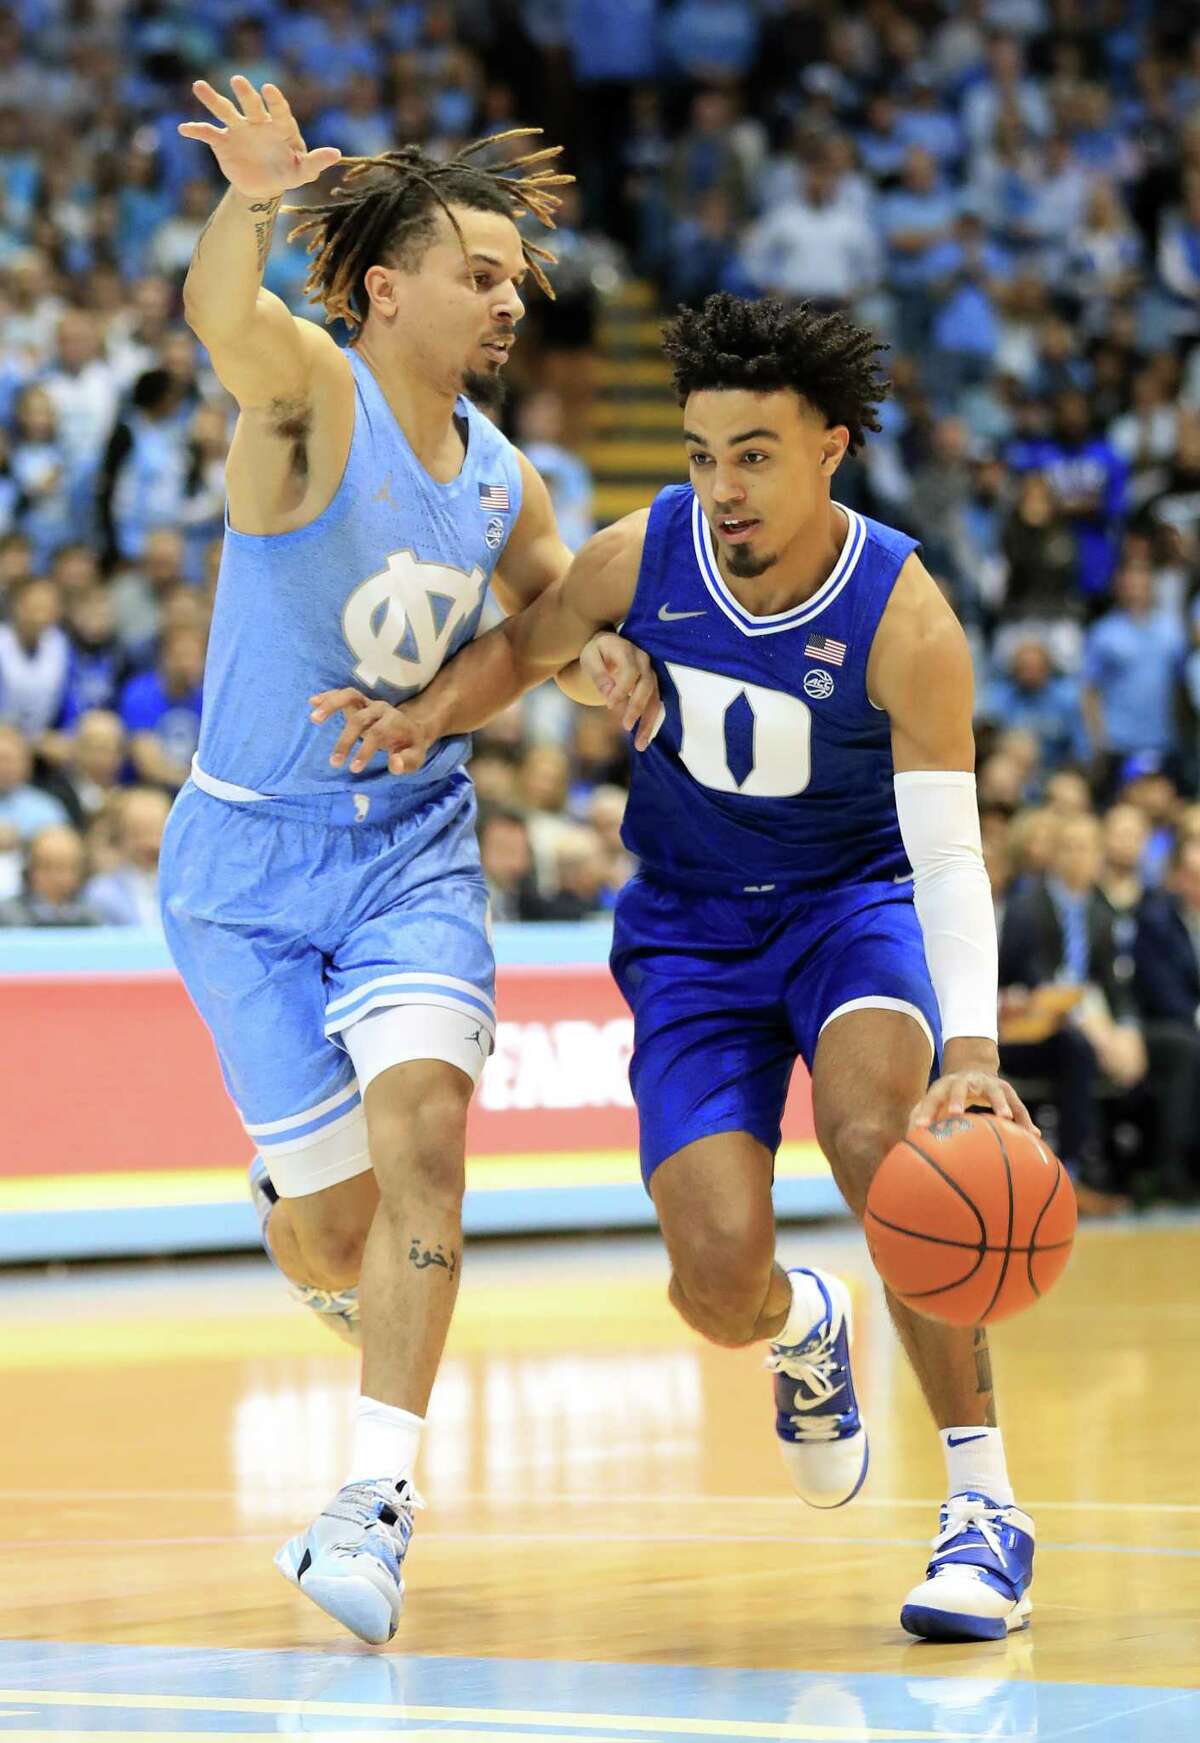 CHAPEL HILL, NORTH CAROLINA - FEBRUARY 08: Tre Jones #3 of the Duke Blue Devils drives to the basket against Cole Anthony #2 of the North Carolina Tar Heels during their game at Dean Smith Center on February 08, 2020 in Chapel Hill, North Carolina. (Photo by Streeter Lecka/Getty Images)